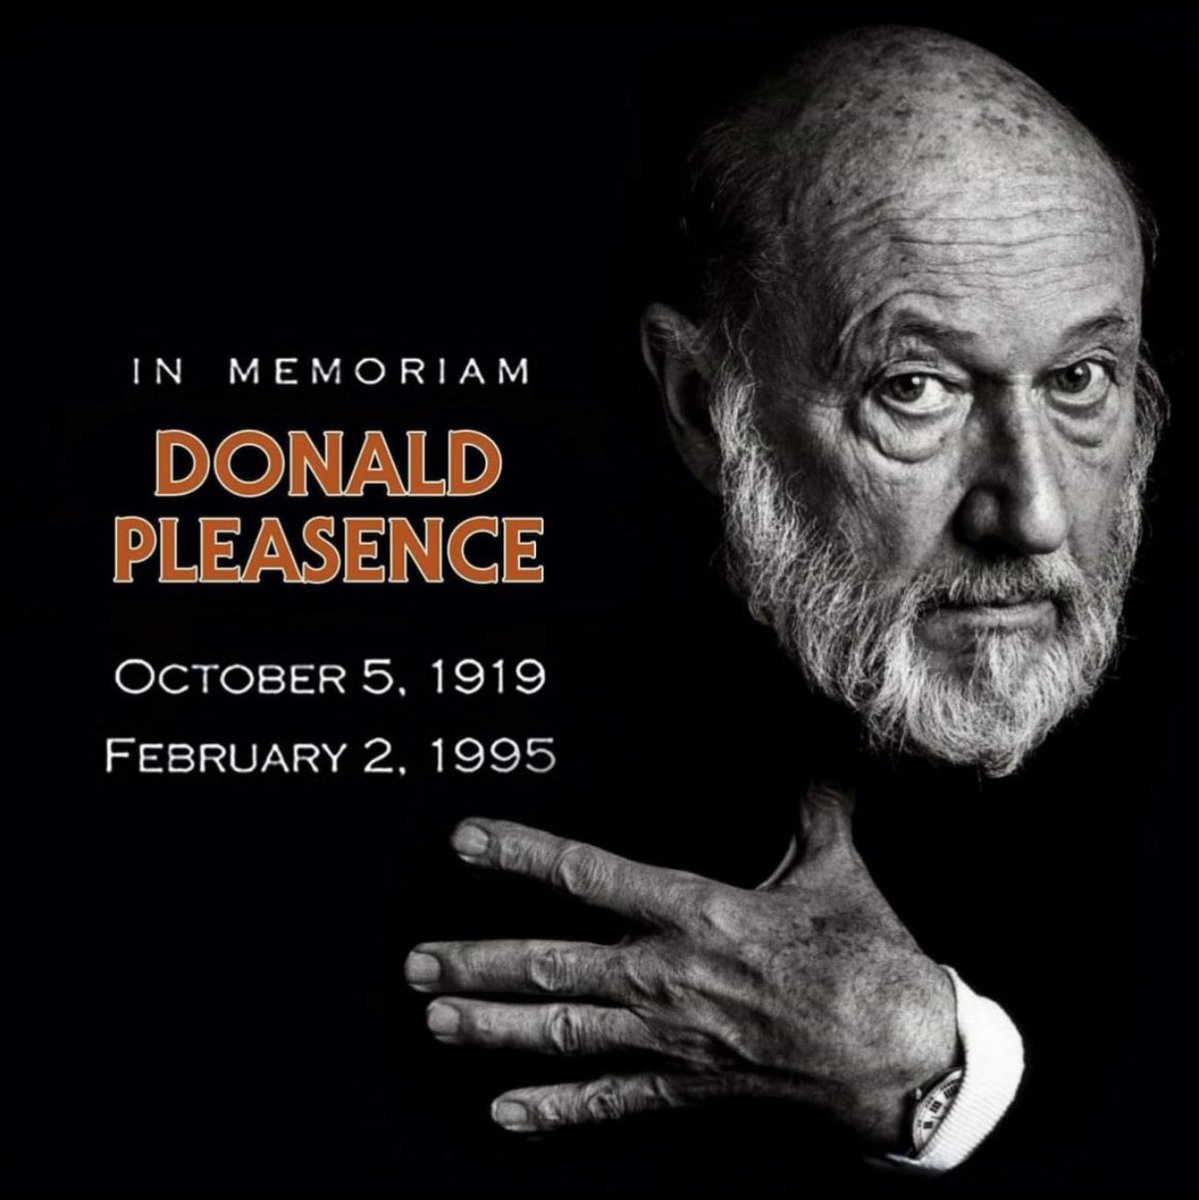 On this date in 1995 we lost a legend. RIP Donald Pleasence aka Dr. Loomis #DonaldPleasence #DrLoomis